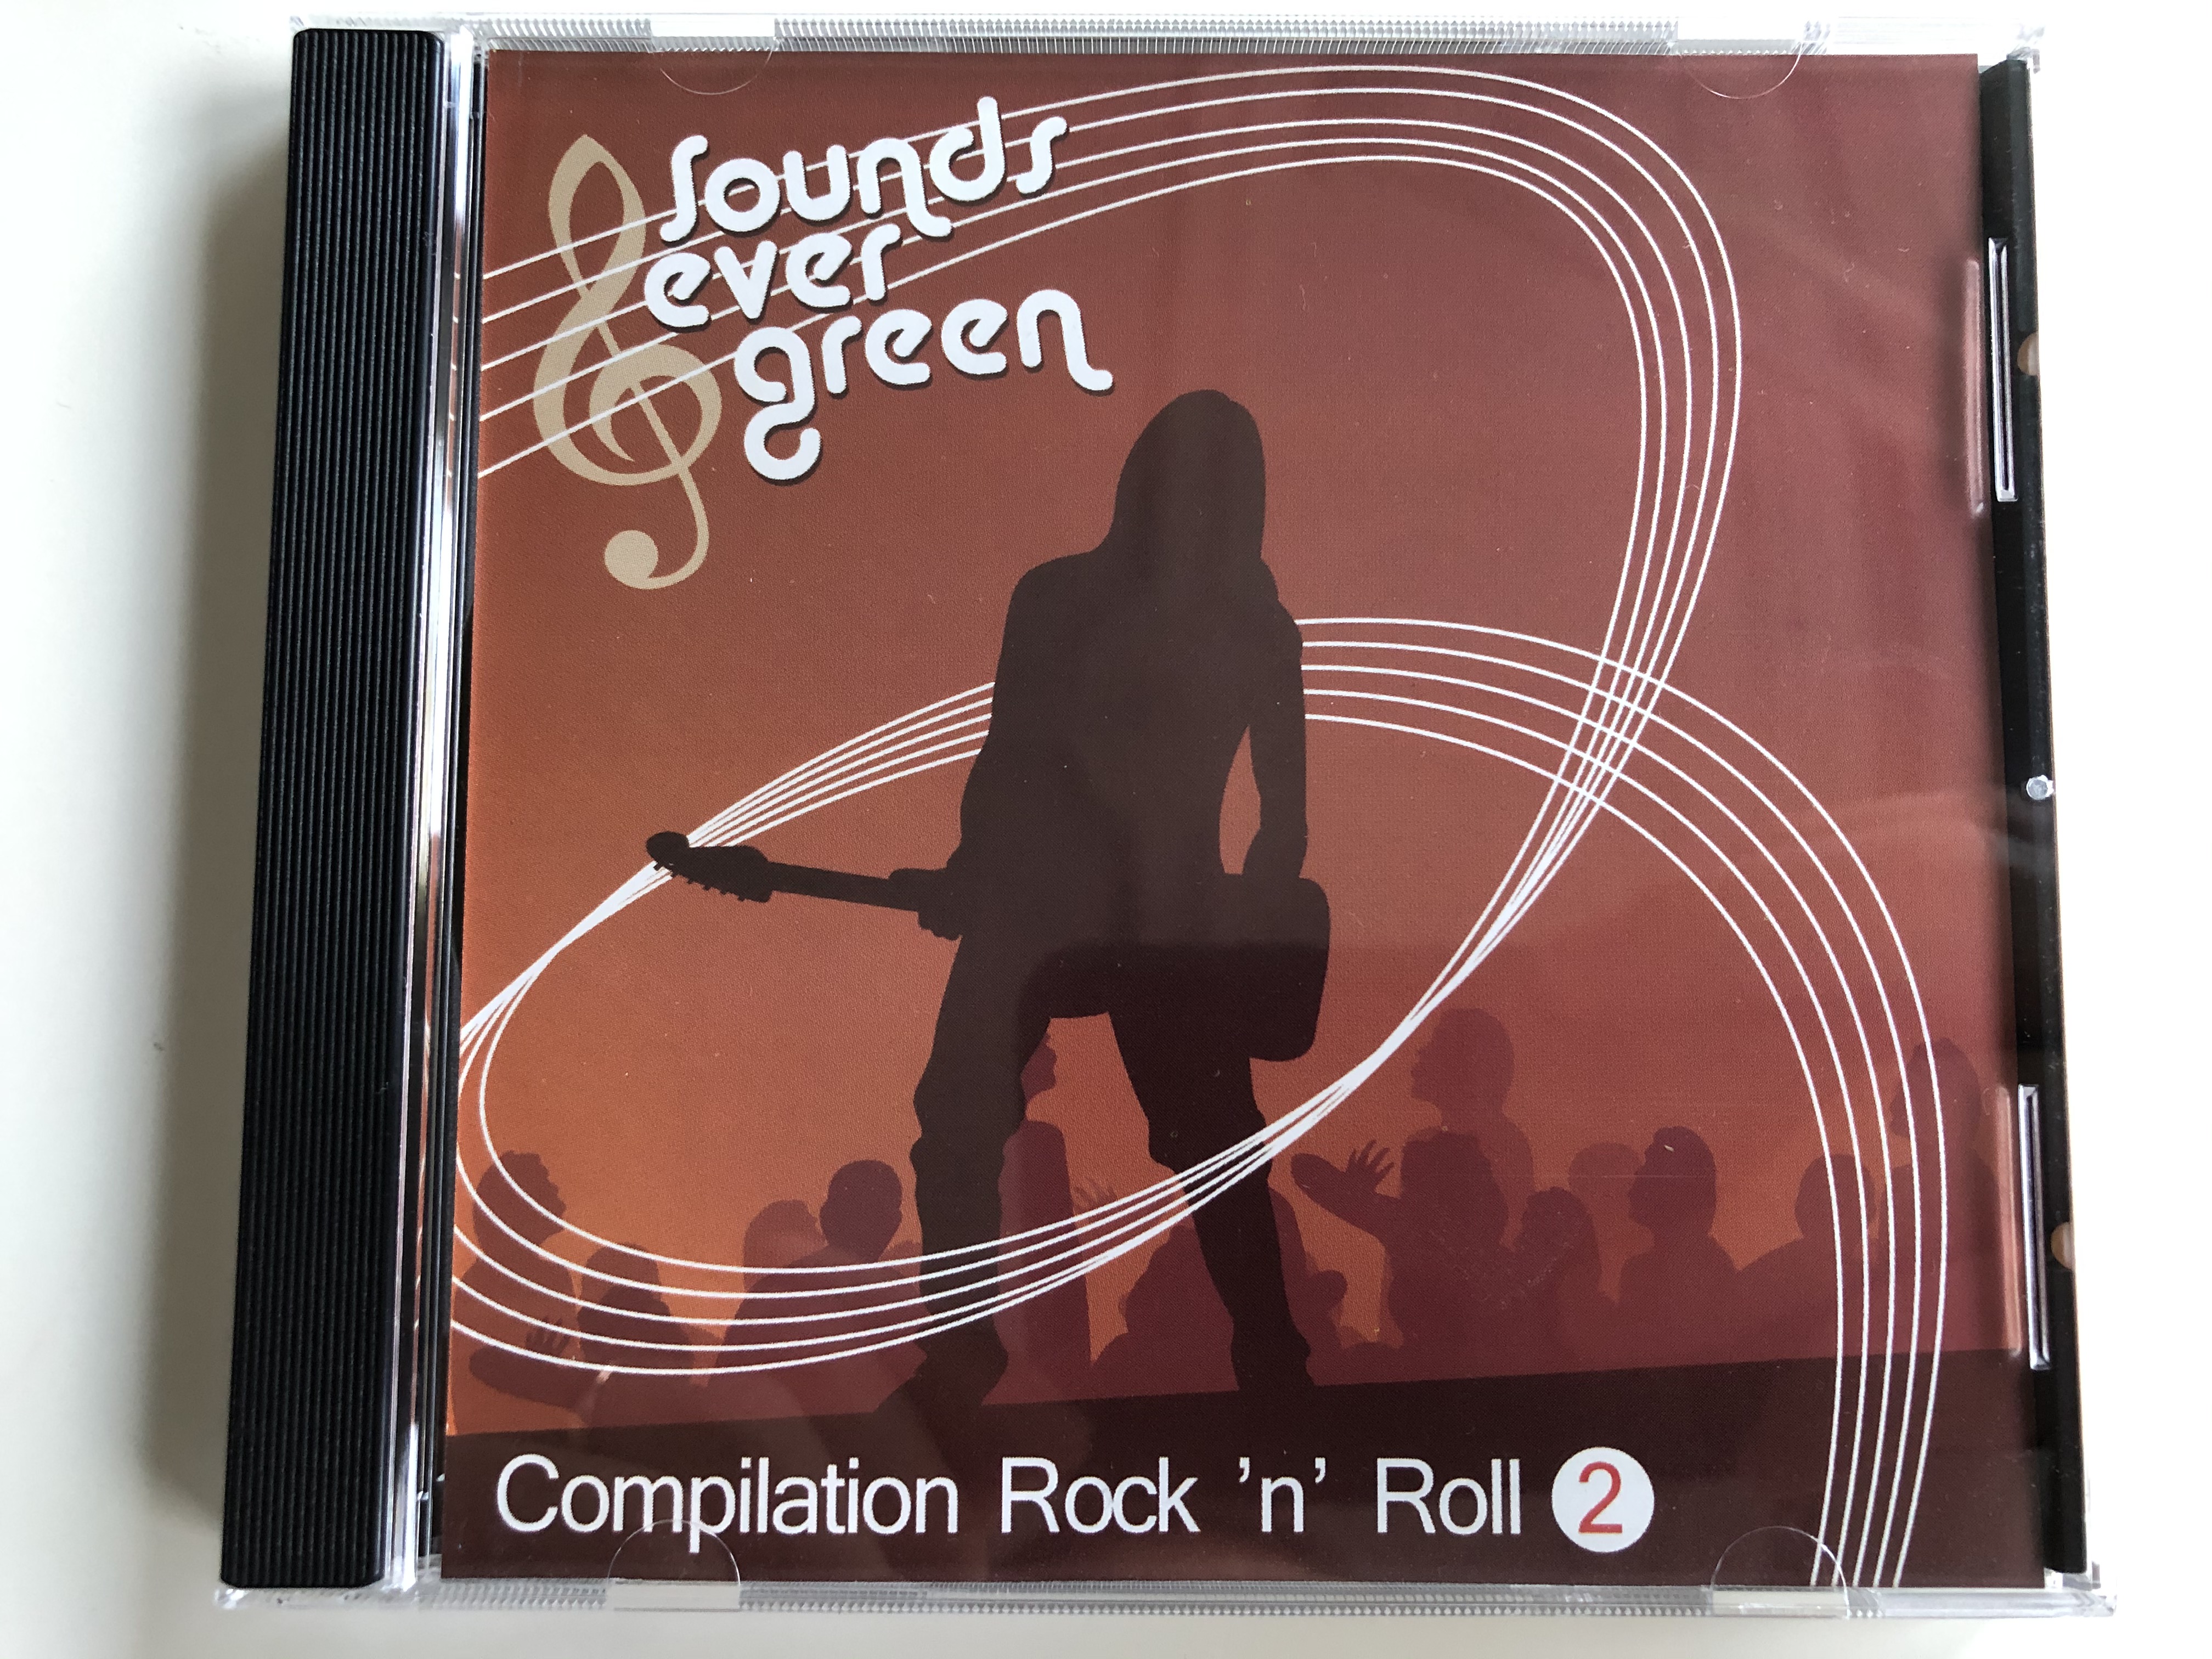 sounds-ever-green-compilation-rock-n-roll-2-sounds-ever-green-audio-cd-2007-nico002-1-.jpg